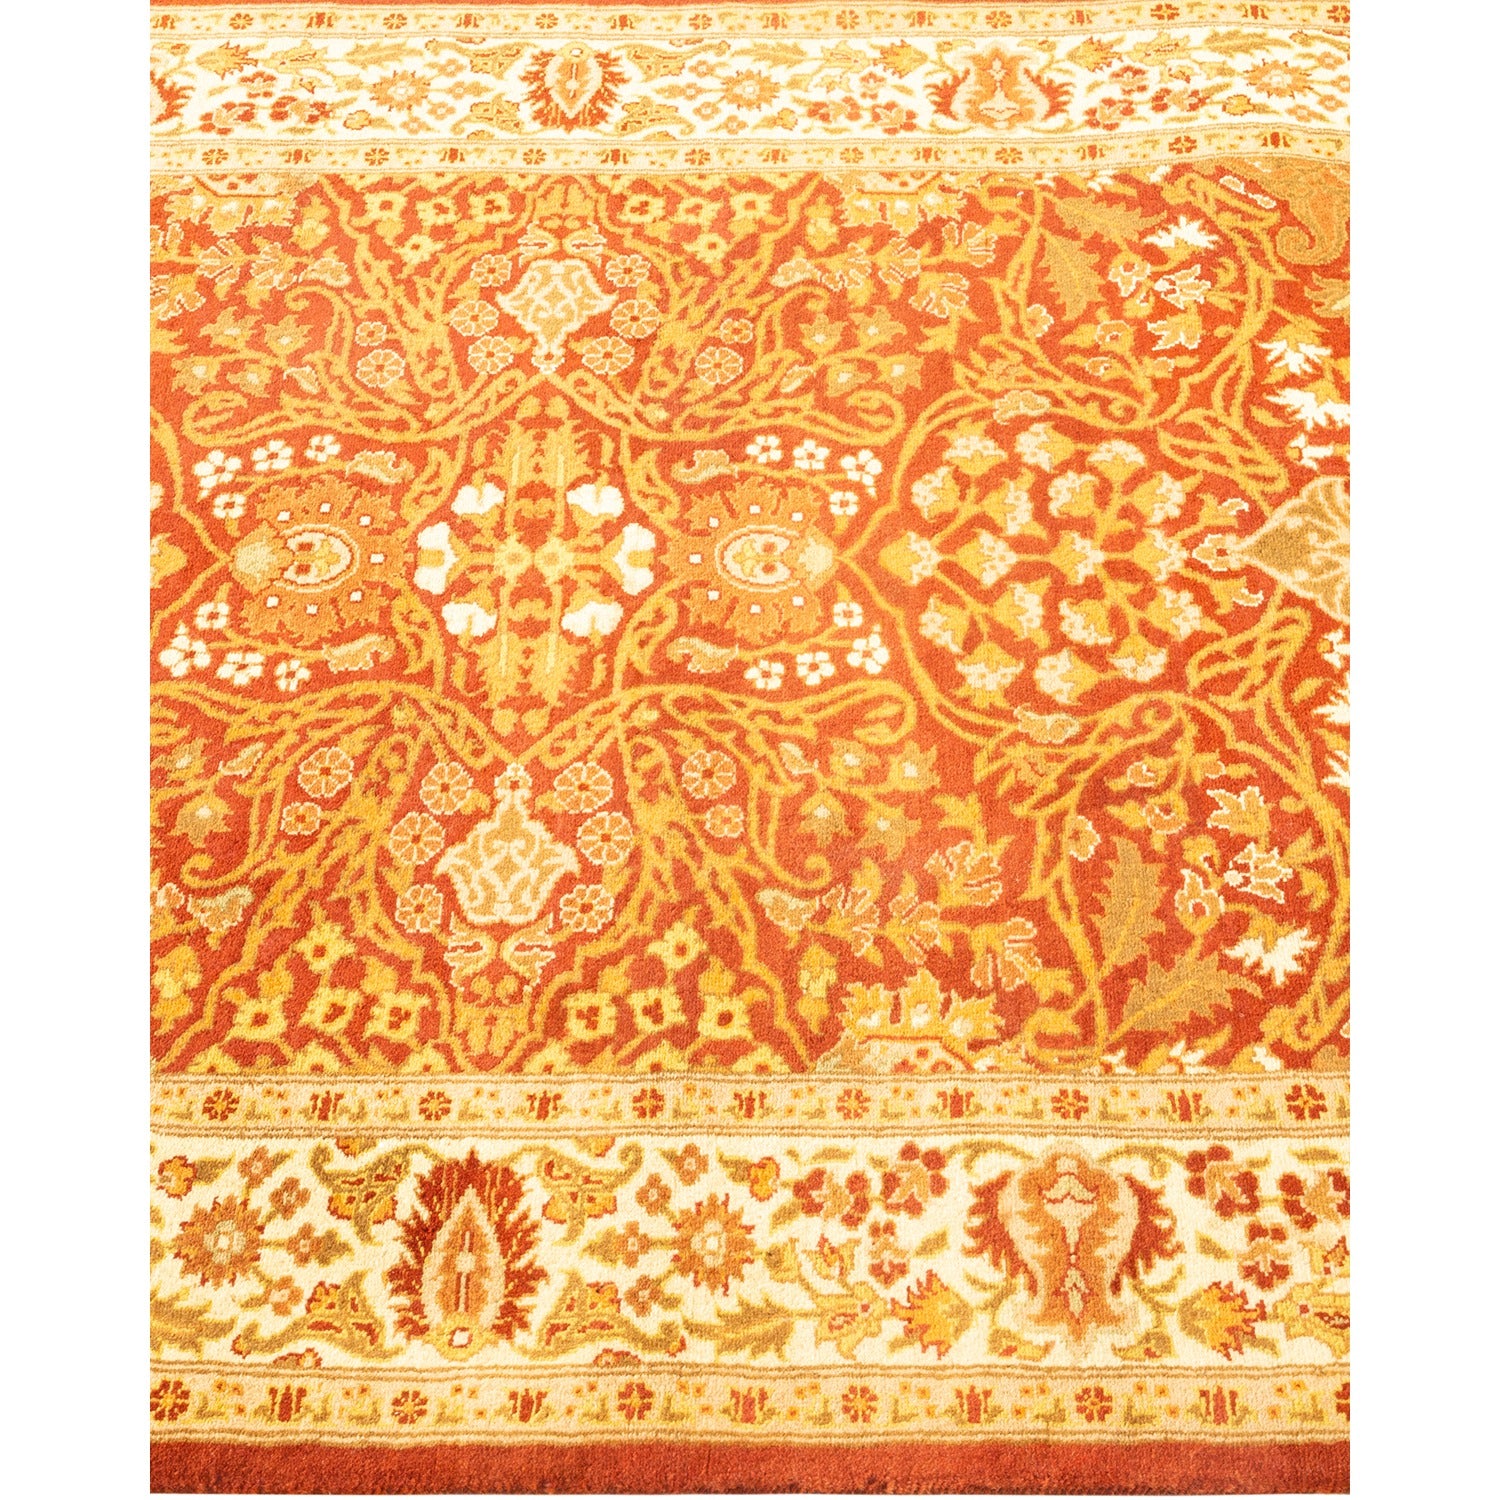 Exquisite, hand-knotted Oriental rug showcases intricate floral motifs in gold.